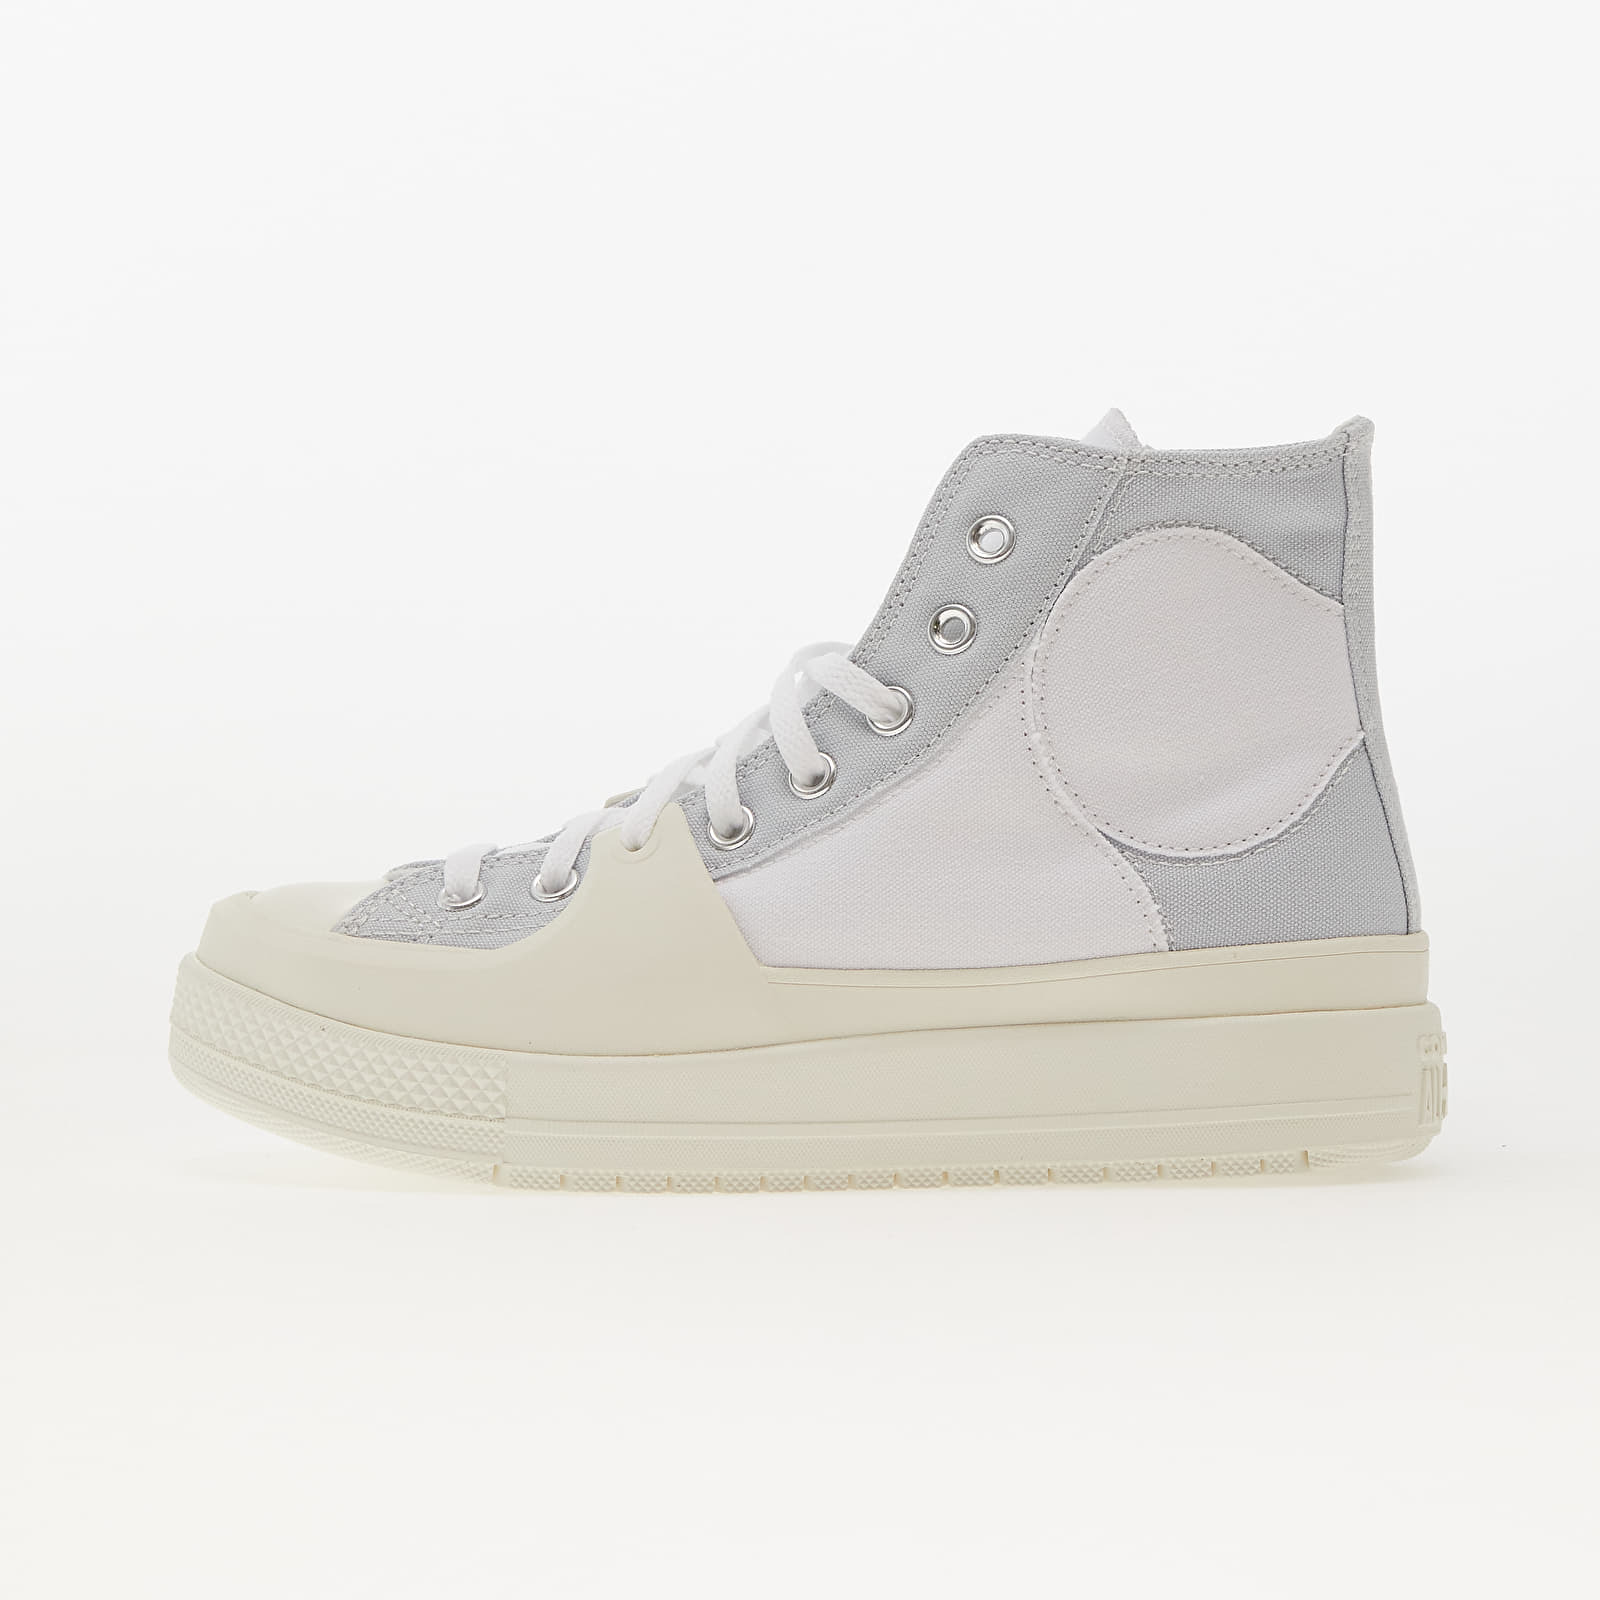 Levně Converse Chuck Taylor All Star Construct Summer Tone White/ Ghosted/ Black